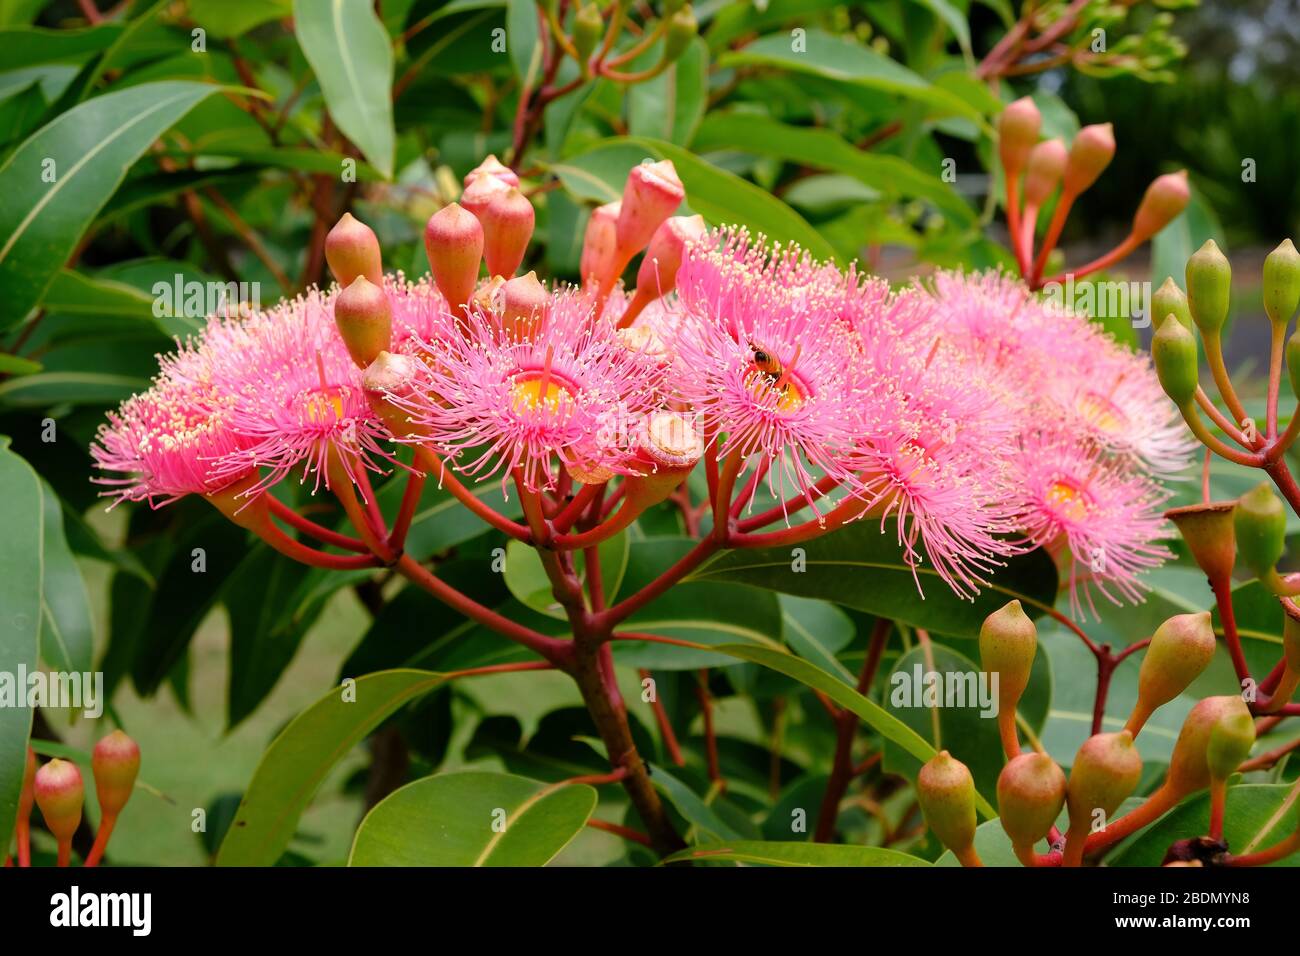 Bright pink Corymbia ficifolia flowers, an Australian native plant, surrounded by foliage and unopened flower buds. Stock Photo